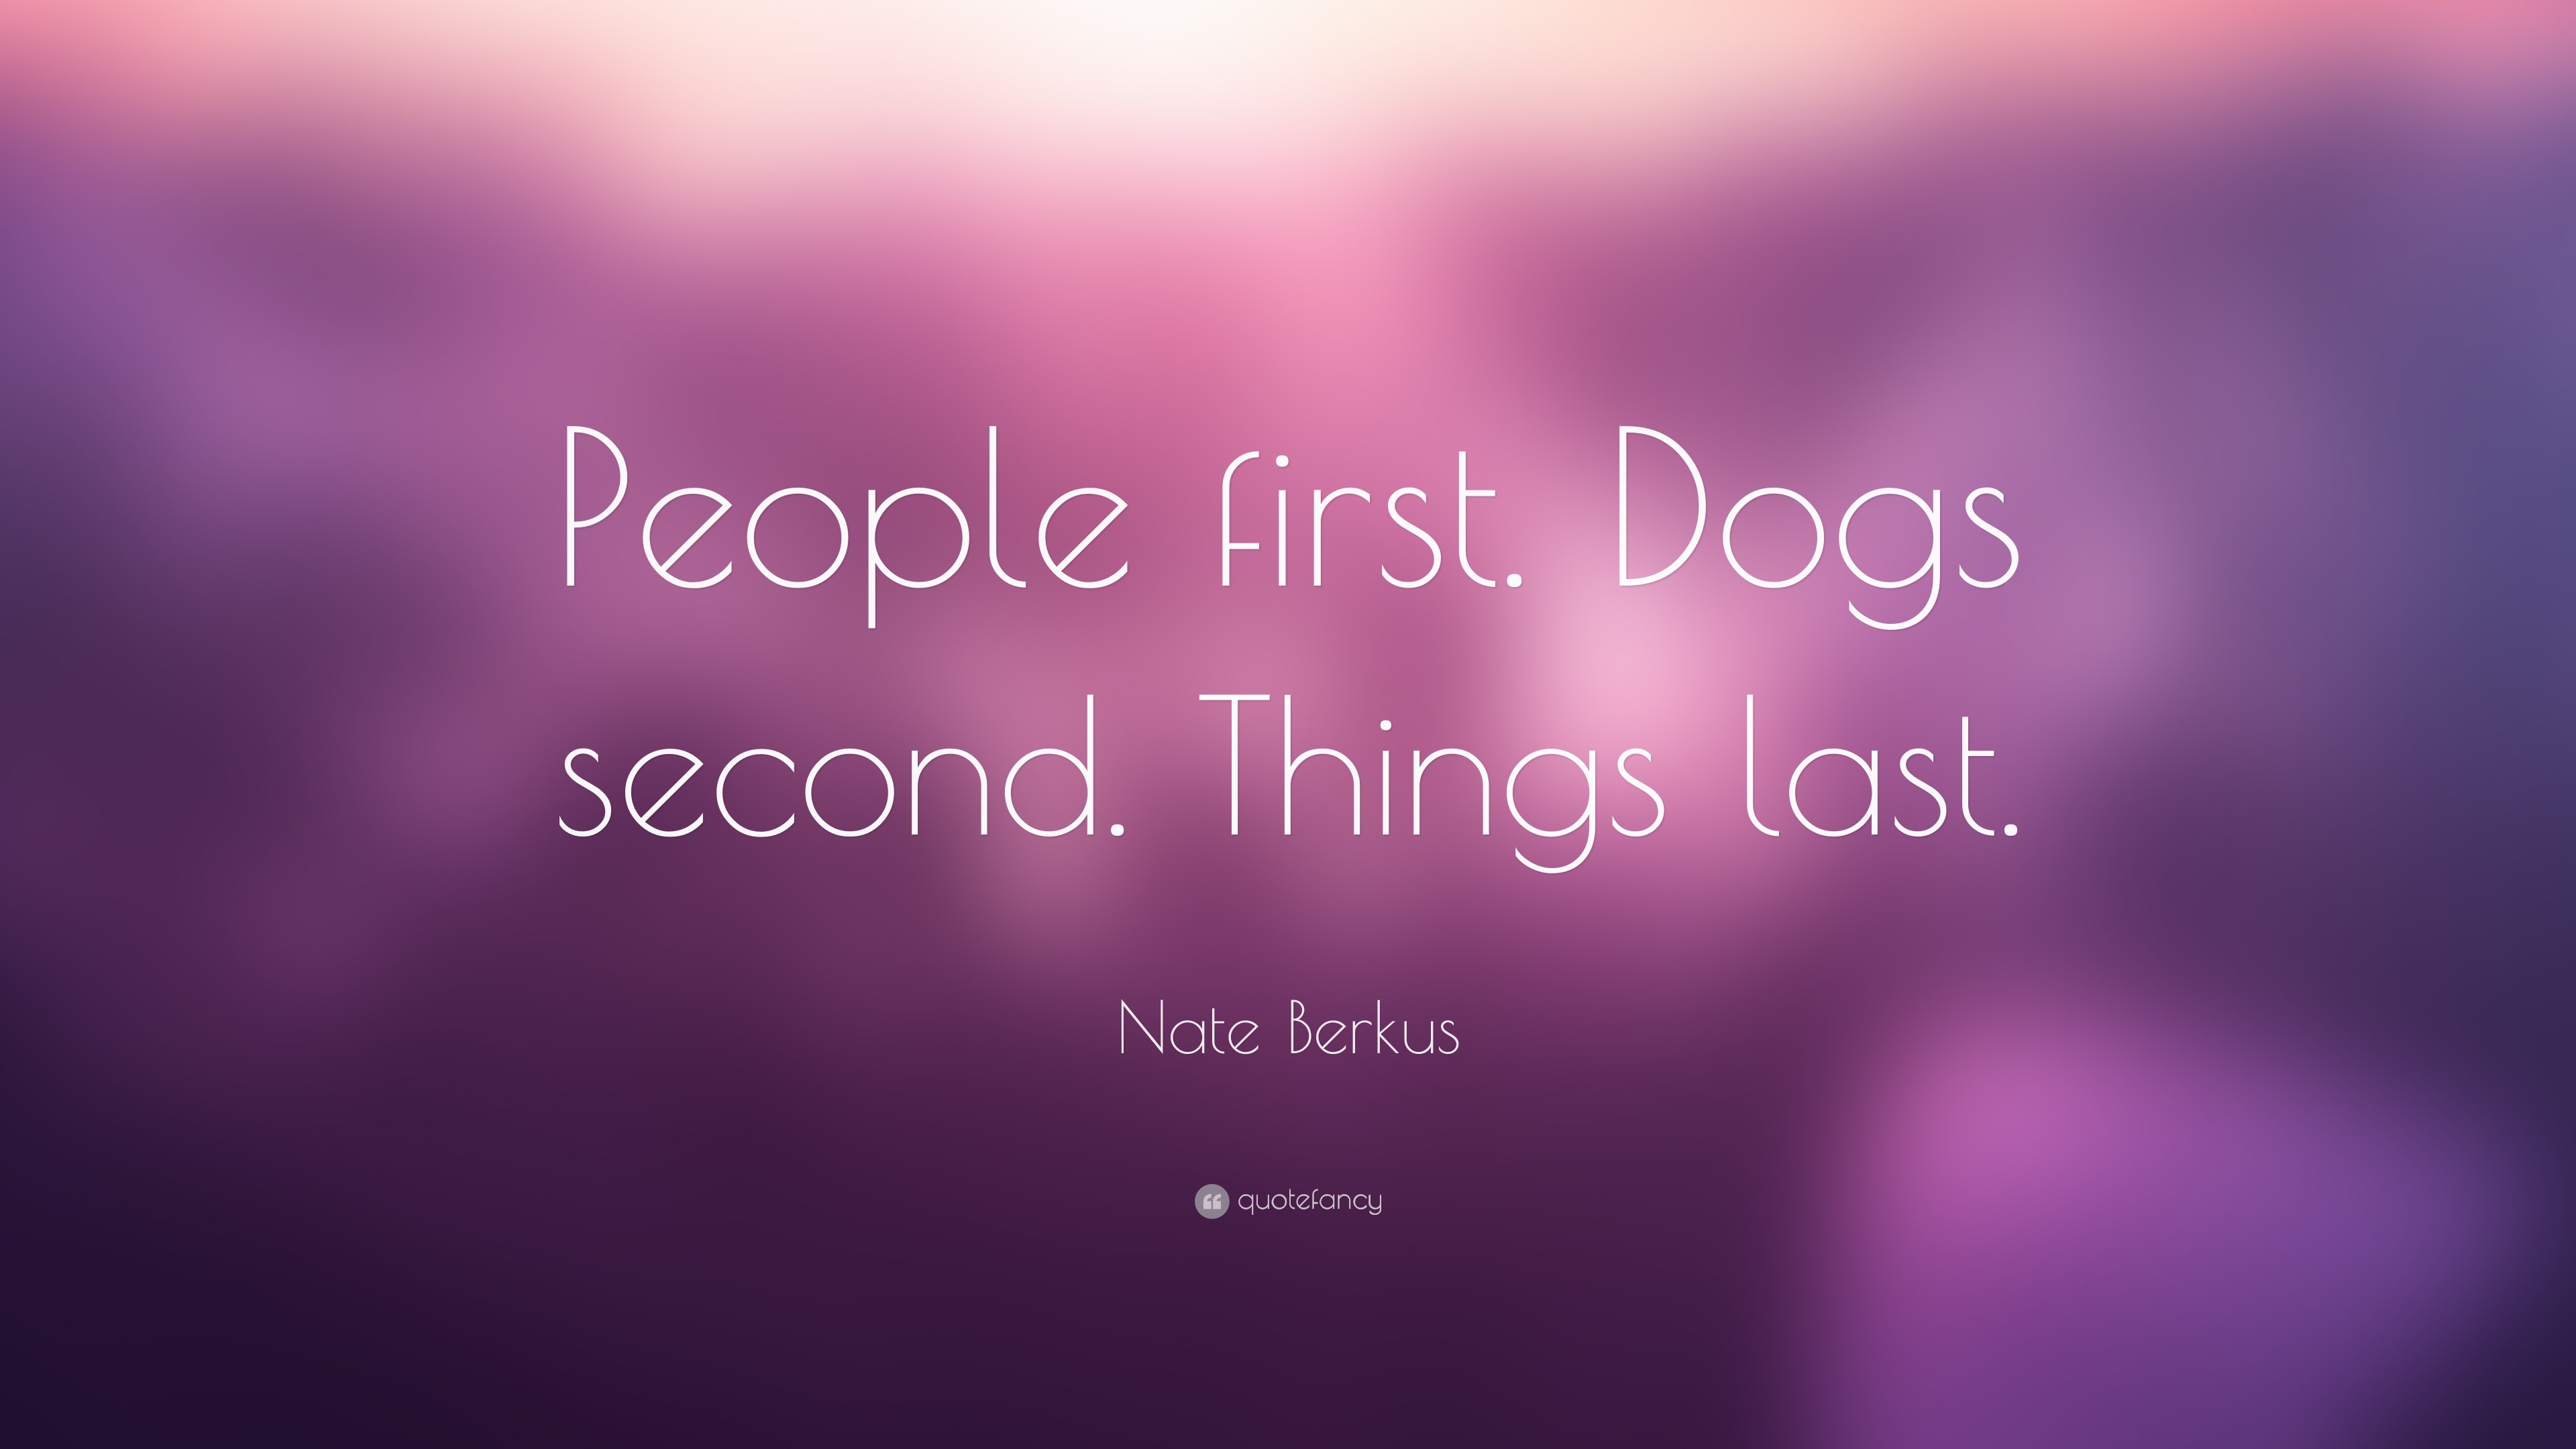 Nate Berkus Quote: “People first. Dogs second. Things last.”